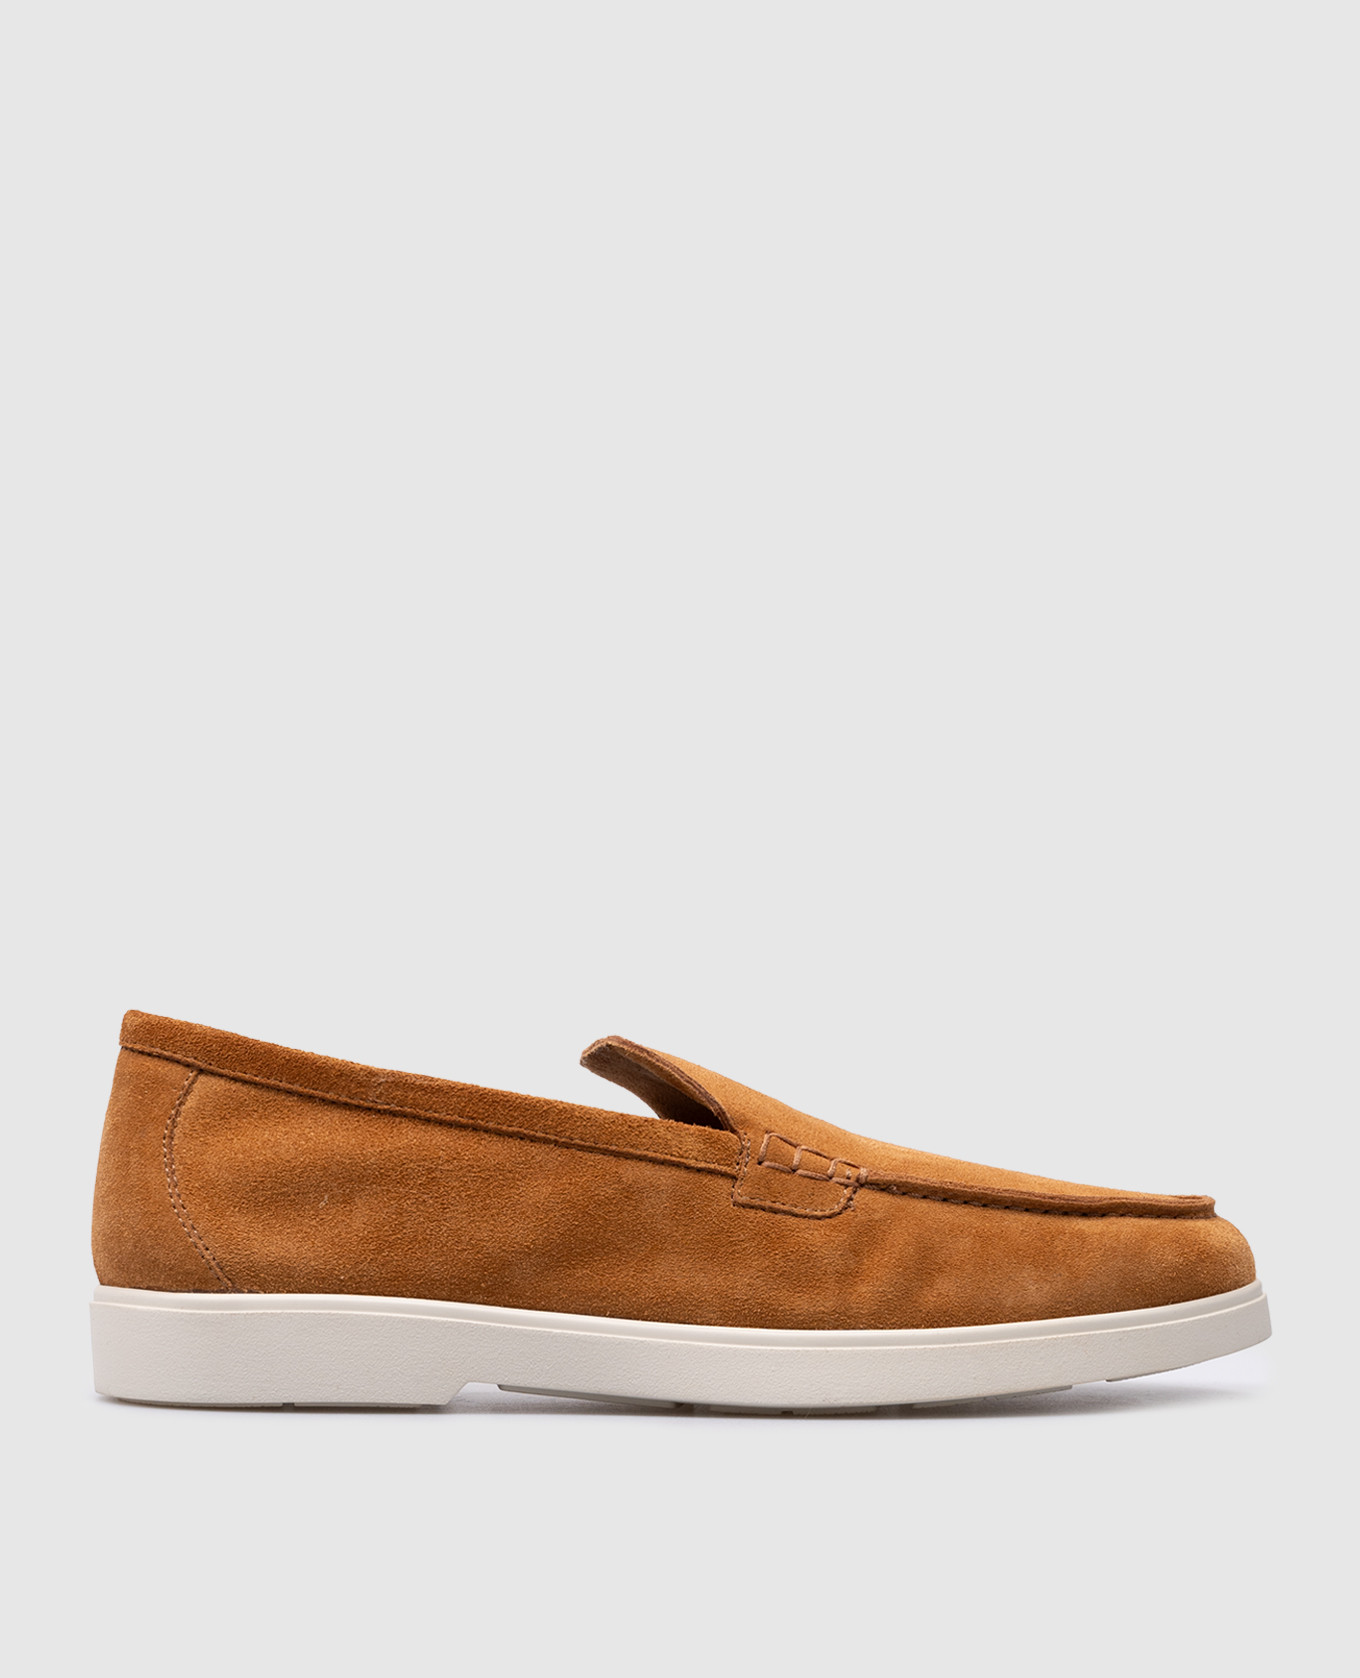 SAVILLE brown suede loafers